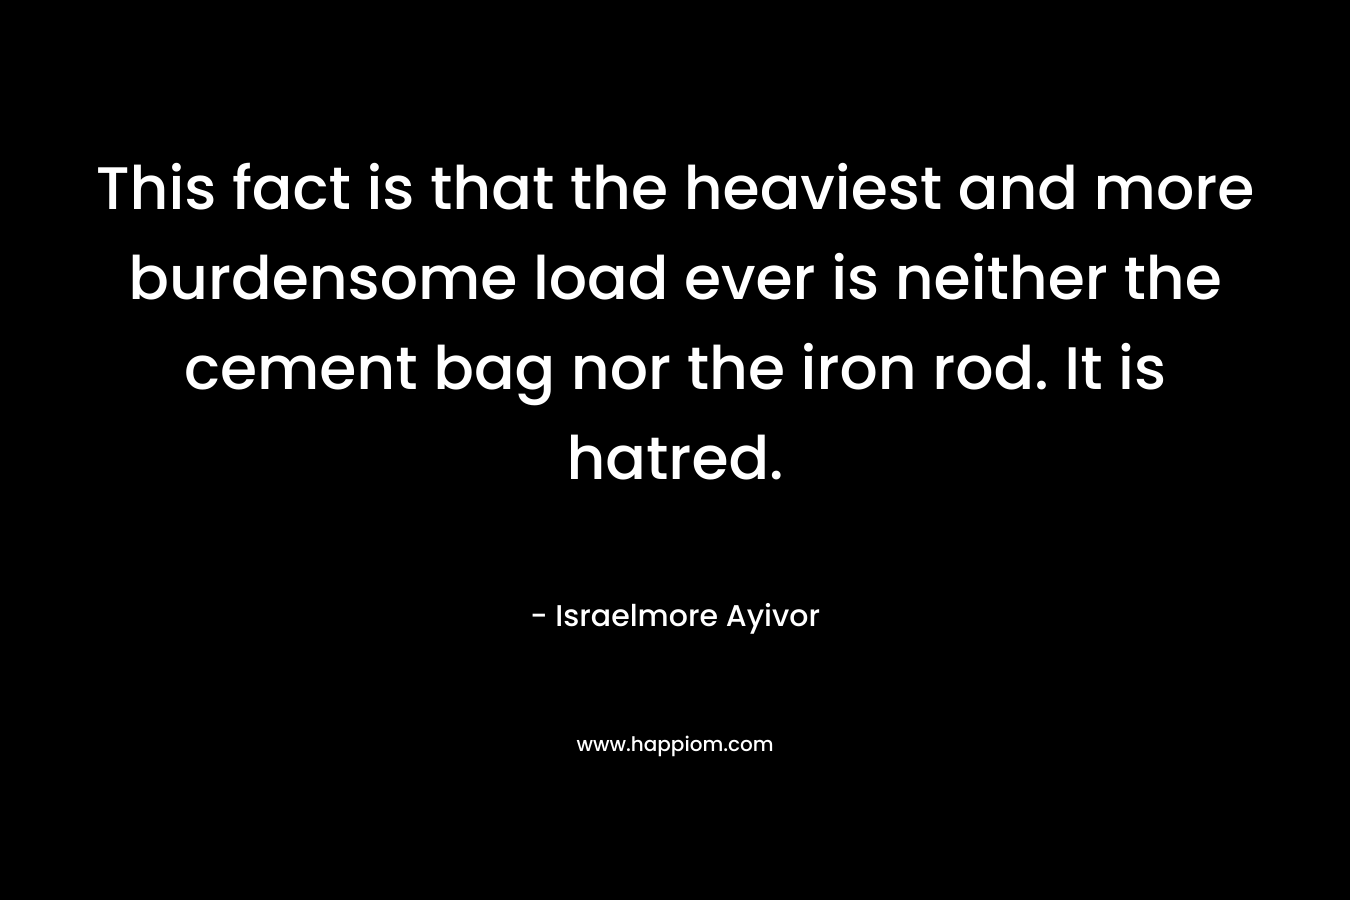 This fact is that the heaviest and more burdensome load ever is neither the cement bag nor the iron rod. It is hatred. – Israelmore Ayivor